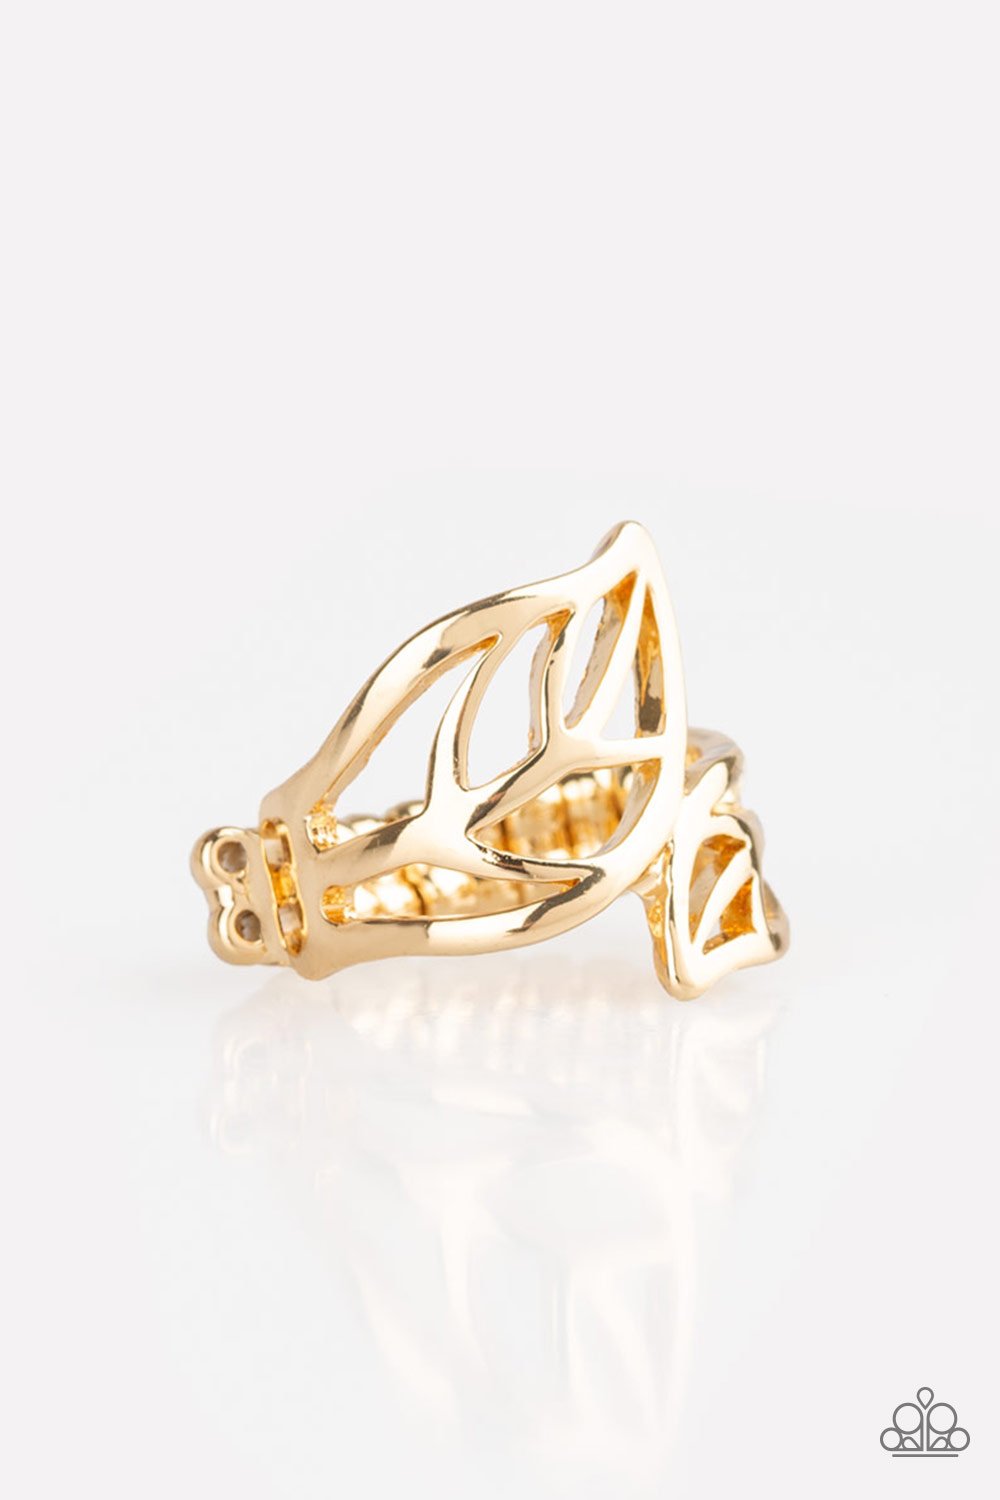 LEAF It All Behind - Gold Ring